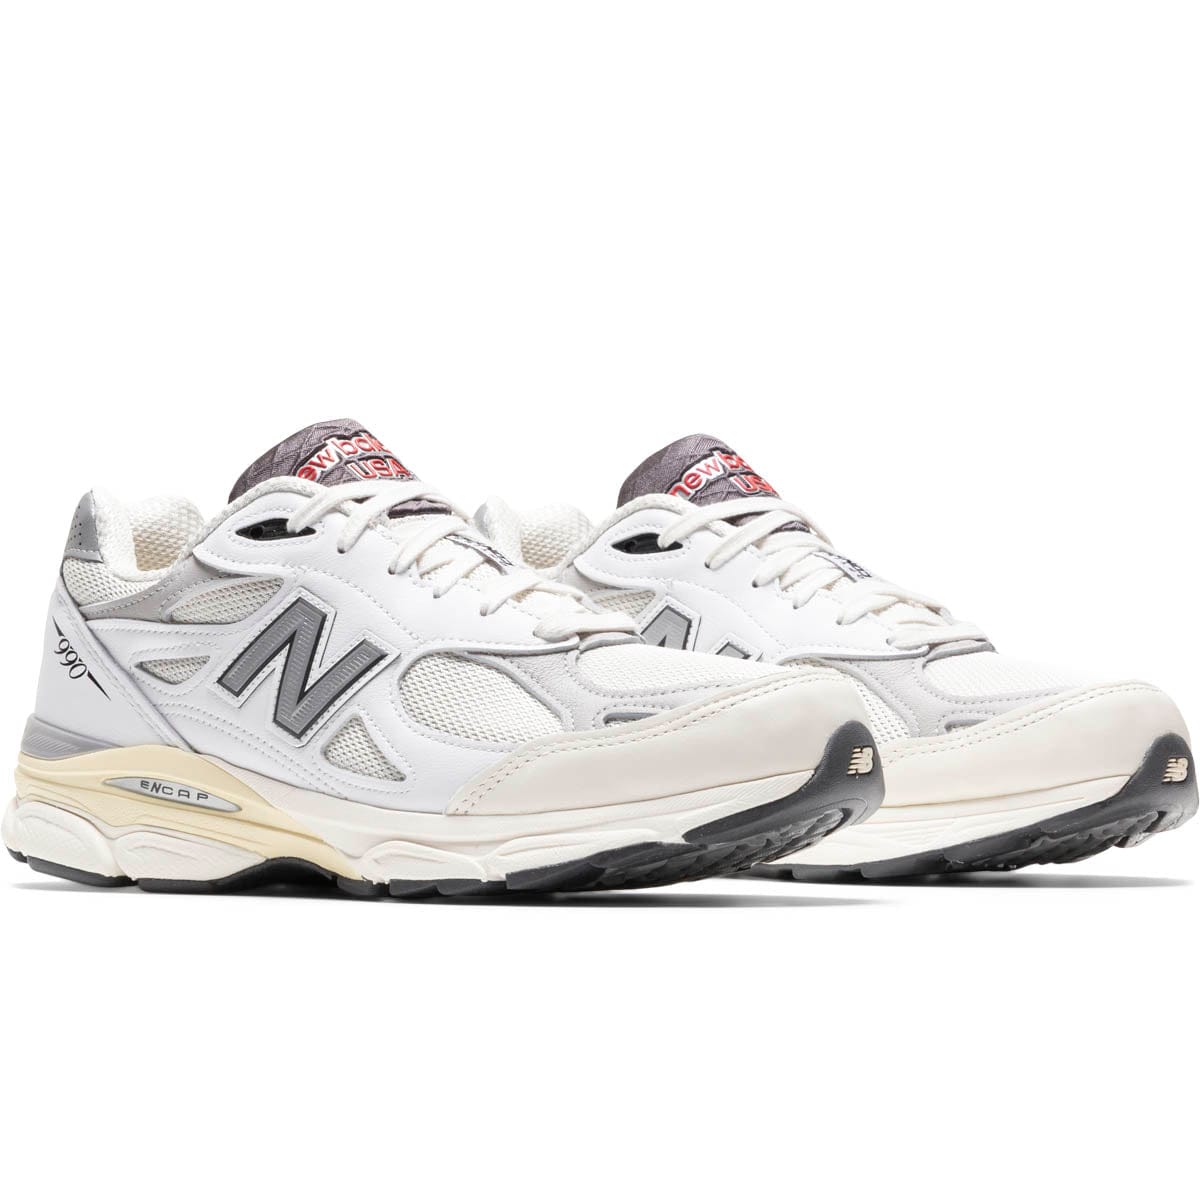 New Balance Sneakers MADE BY TEDDY SANTIS M990AL3